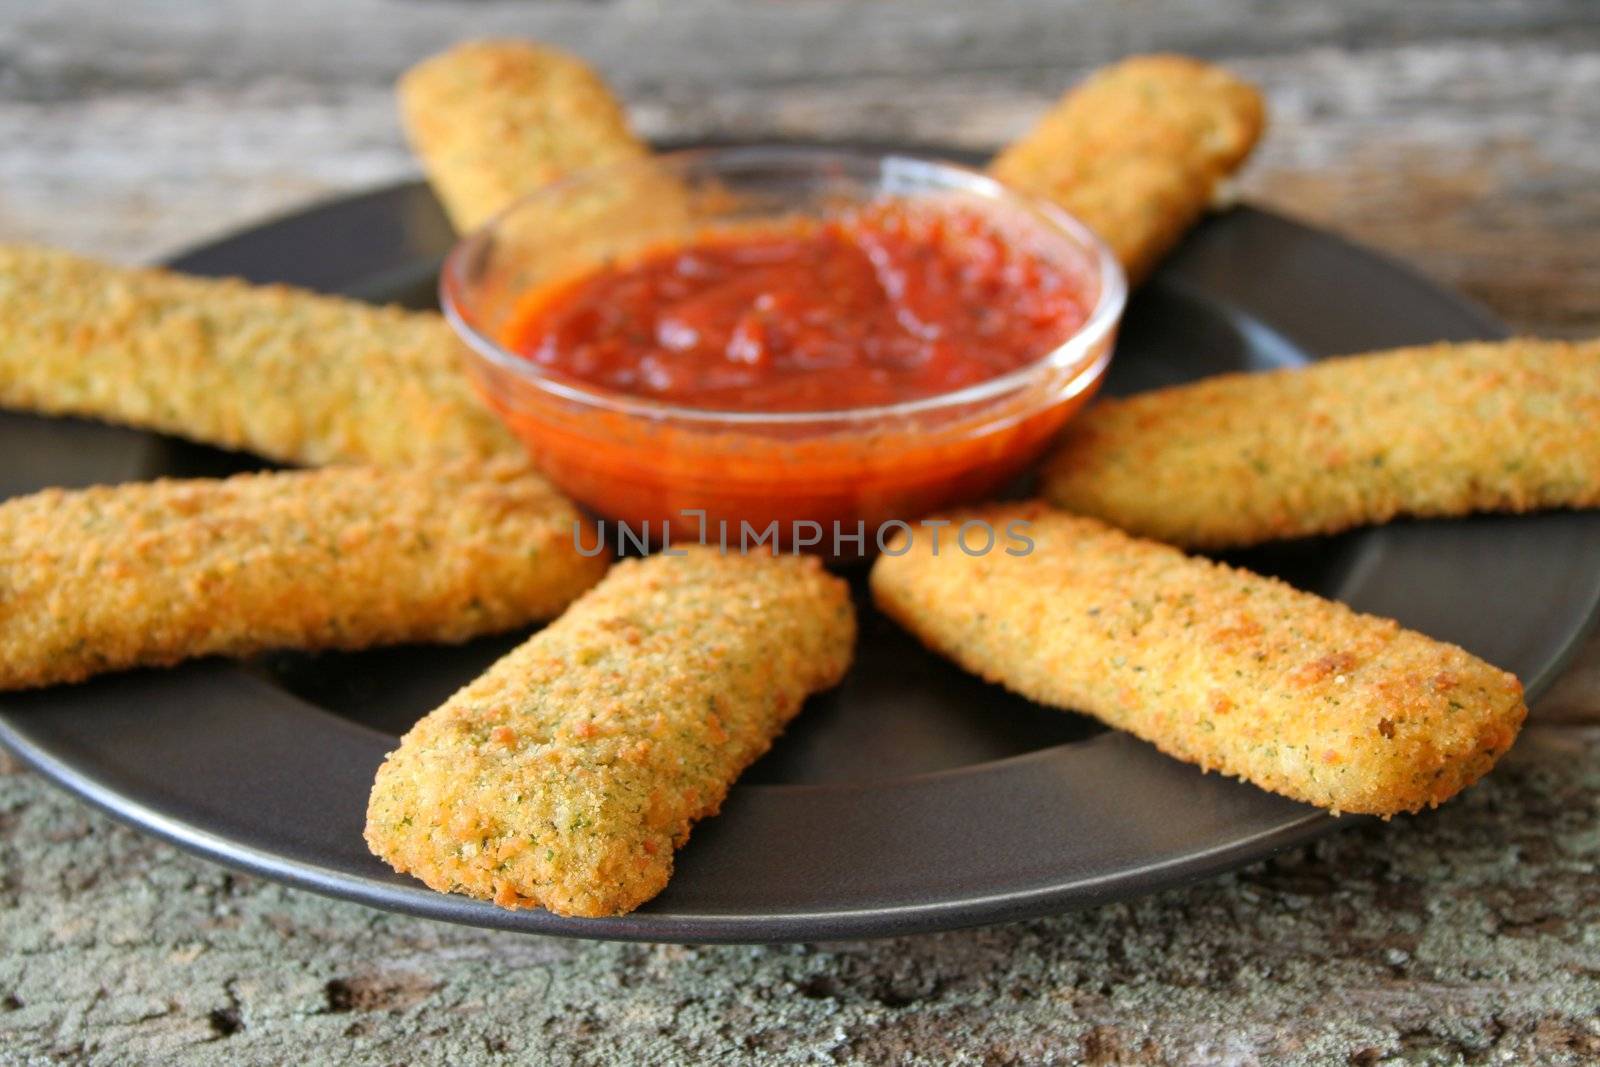 Mozzarella cheese sticks on a plate with marinara sauce.  Used a shallow depth of field on the front stick.